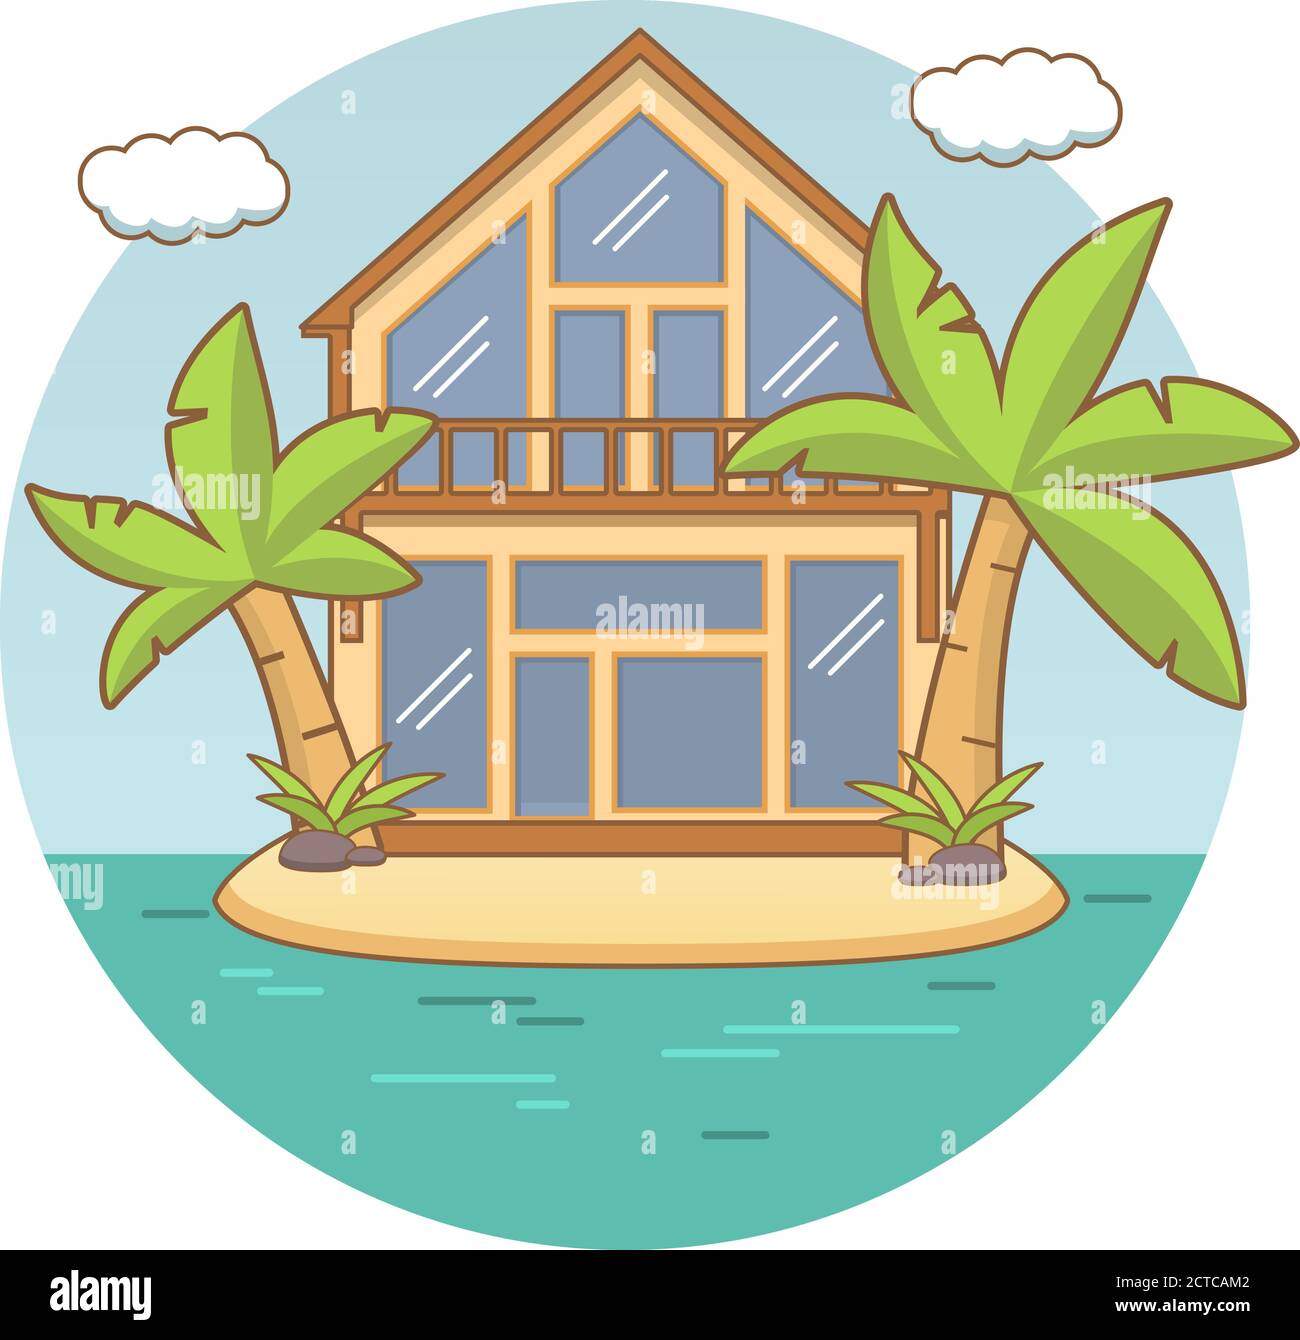 Beach lodge.Tropical island landscape sandy beach and the sea and palm trees,clouds. Stock Vector